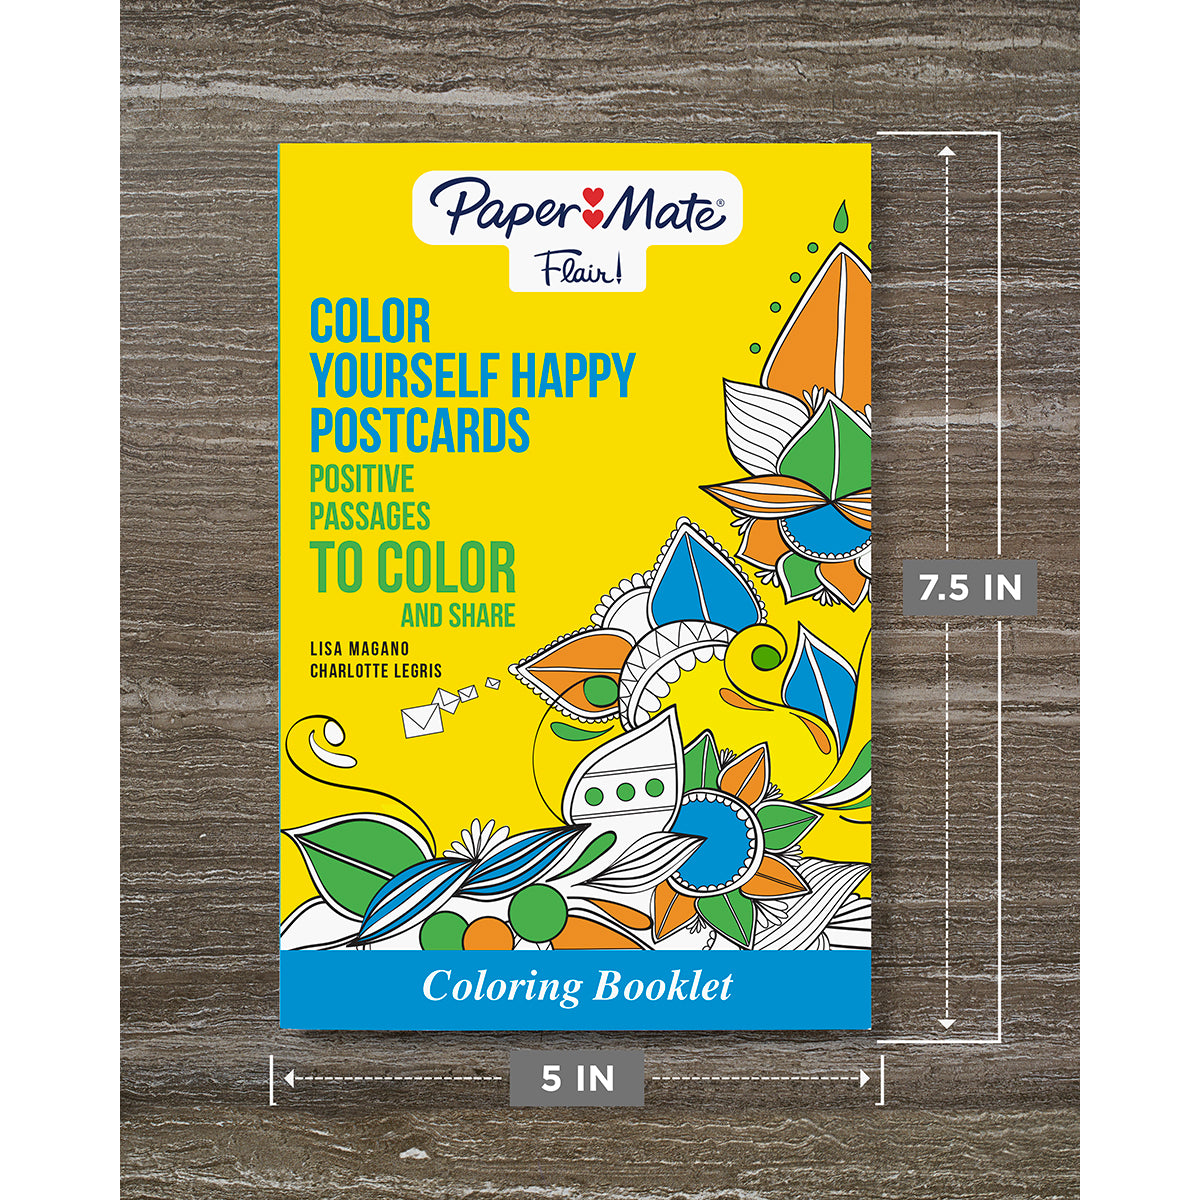 Color Yourself Postcards Adult Coloring Book 16 Postcards - Bulk Pack of 24  Paper Mate Coloring Books